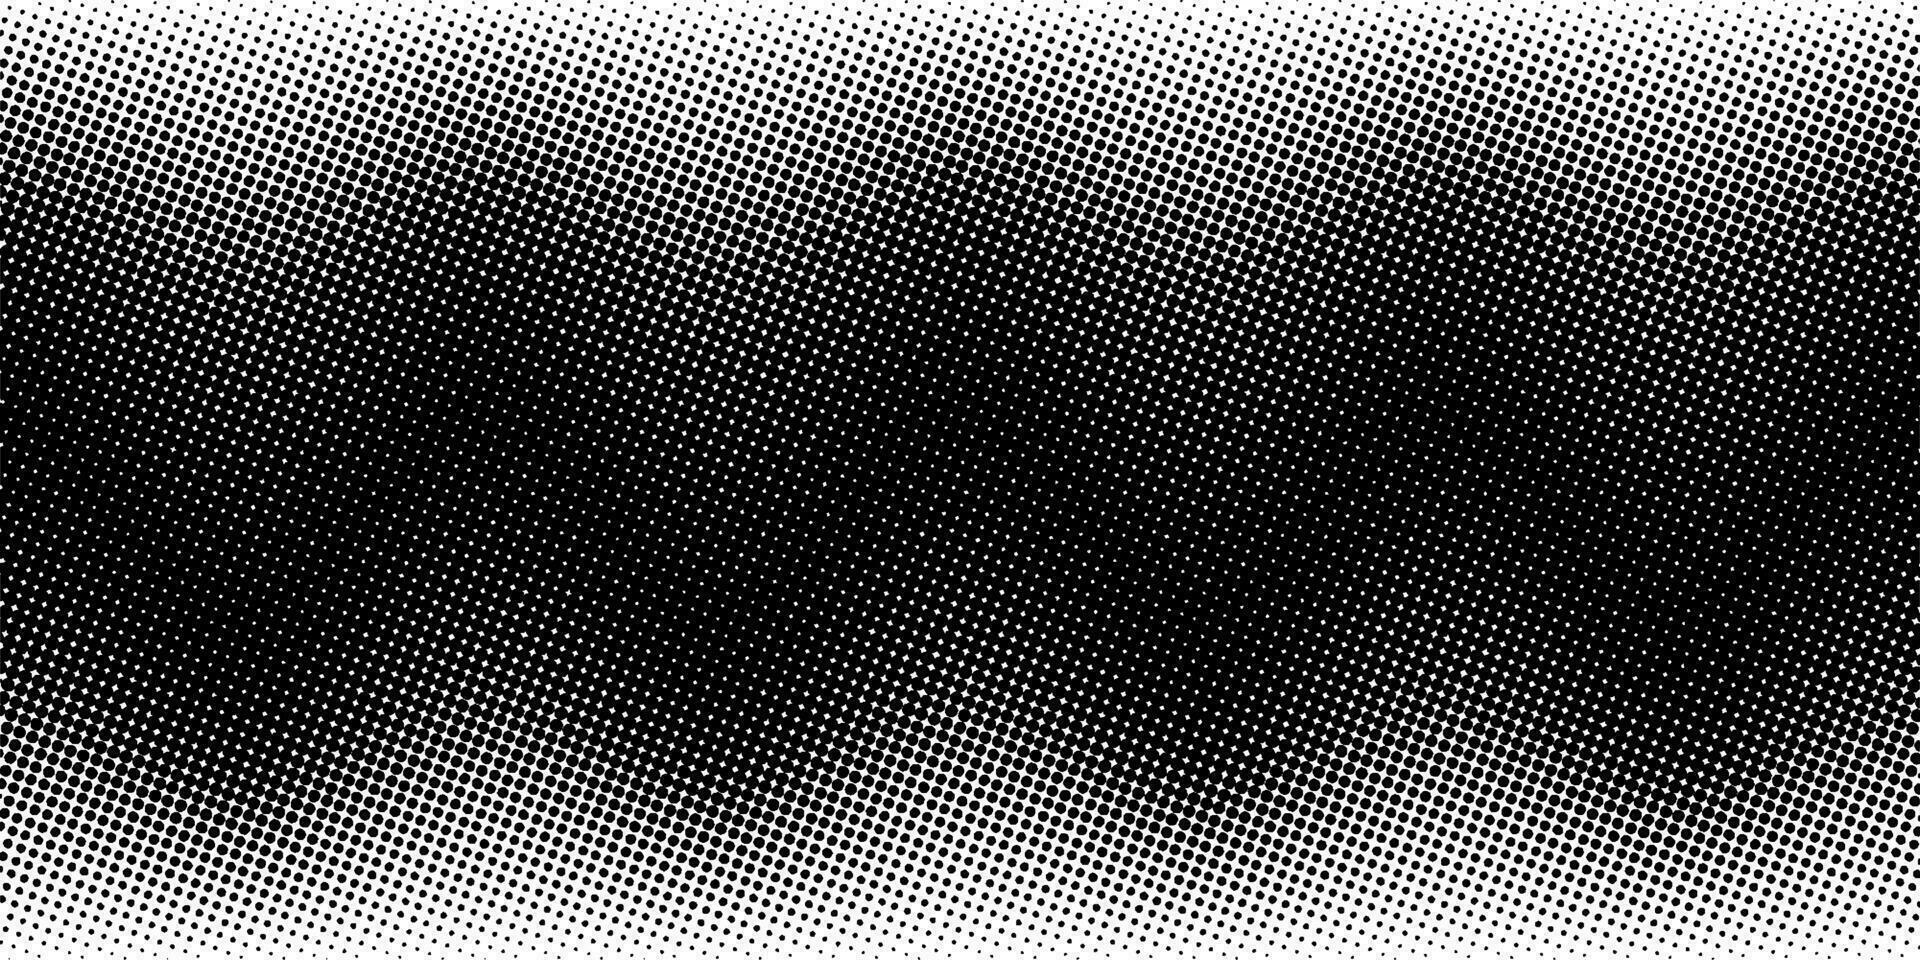 Black and white abstract background with wavy dotted pattern. Halftone effect. Vector illustration.